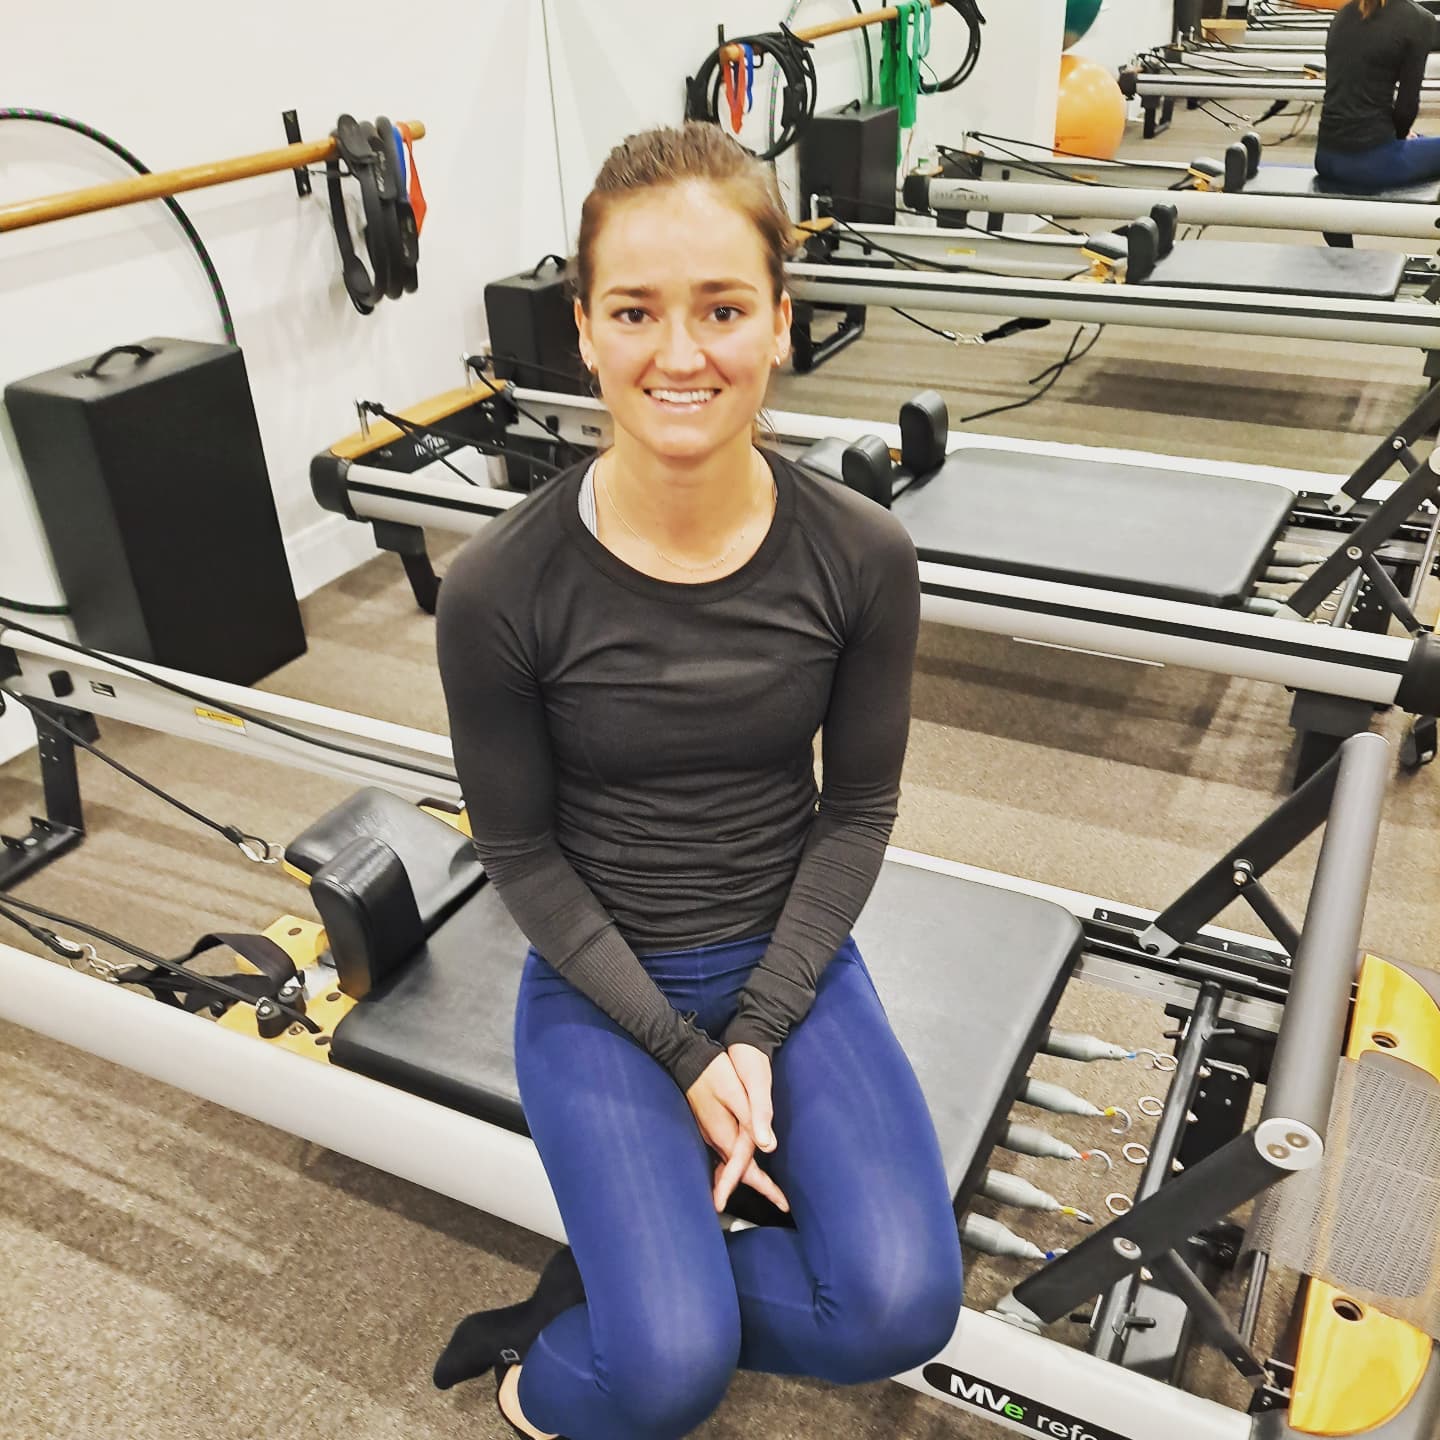 Introducing our new physio Laura, who will be joining the Inner Strength team on Tuesday Nov 30th 🤸 She will be working Tuesdays and Thursdays and is very experienced in physio-led exercise and has a strong interest in women's health and cancer rehabilitation. Laura is also a certified pinc cancer rehabilitation physio.Welcome Laura.